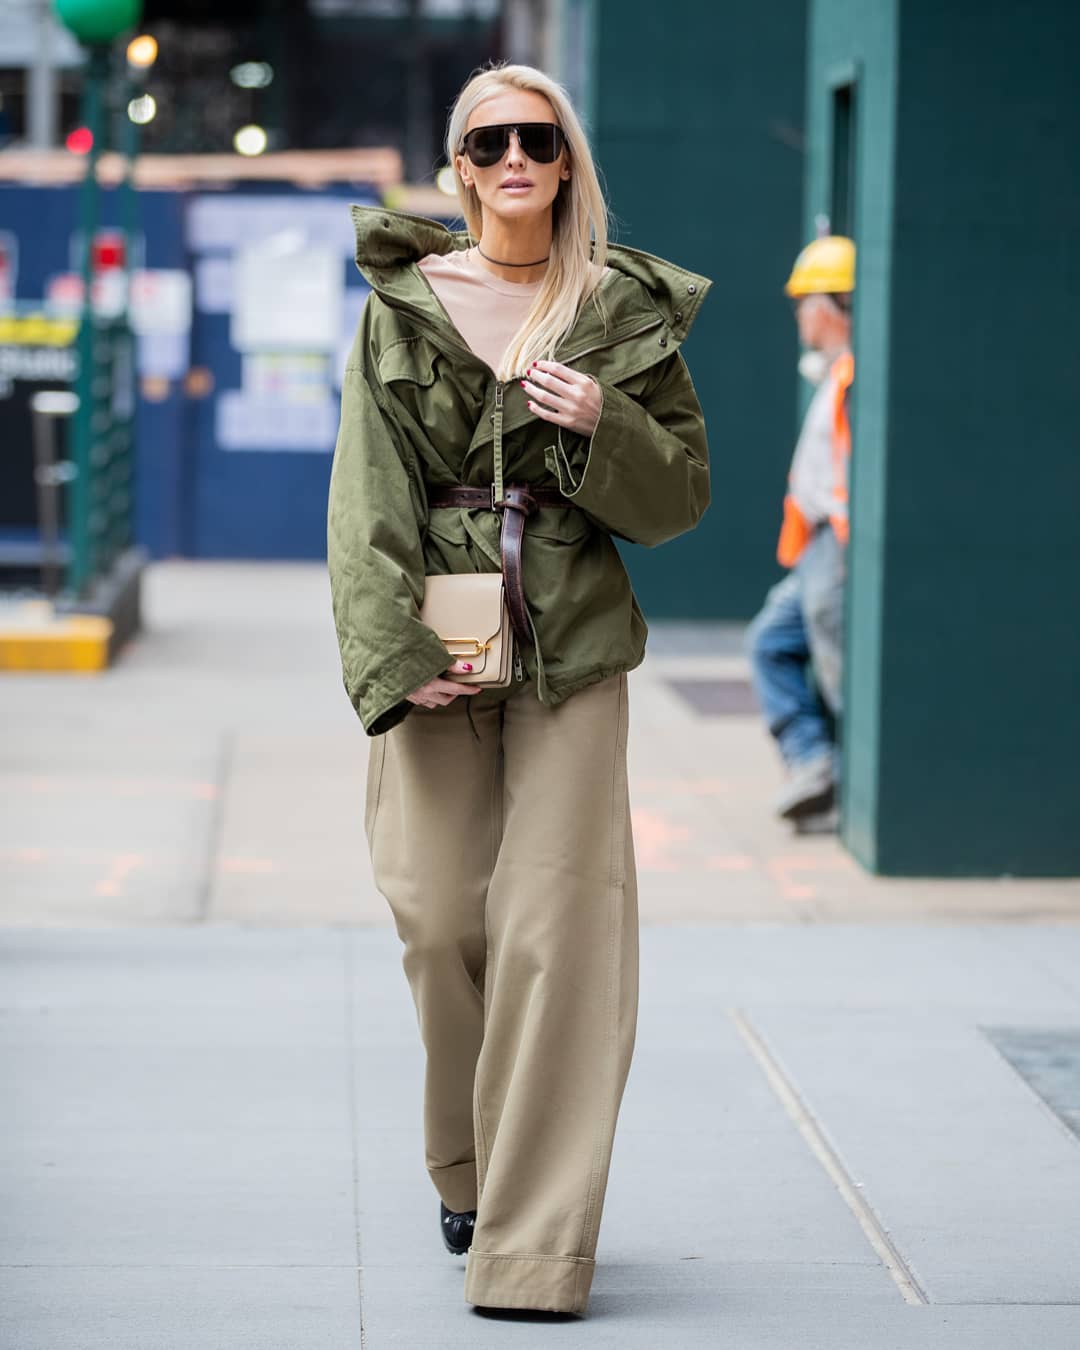 Military-Inspired Jackets are a Key Trend for Spring